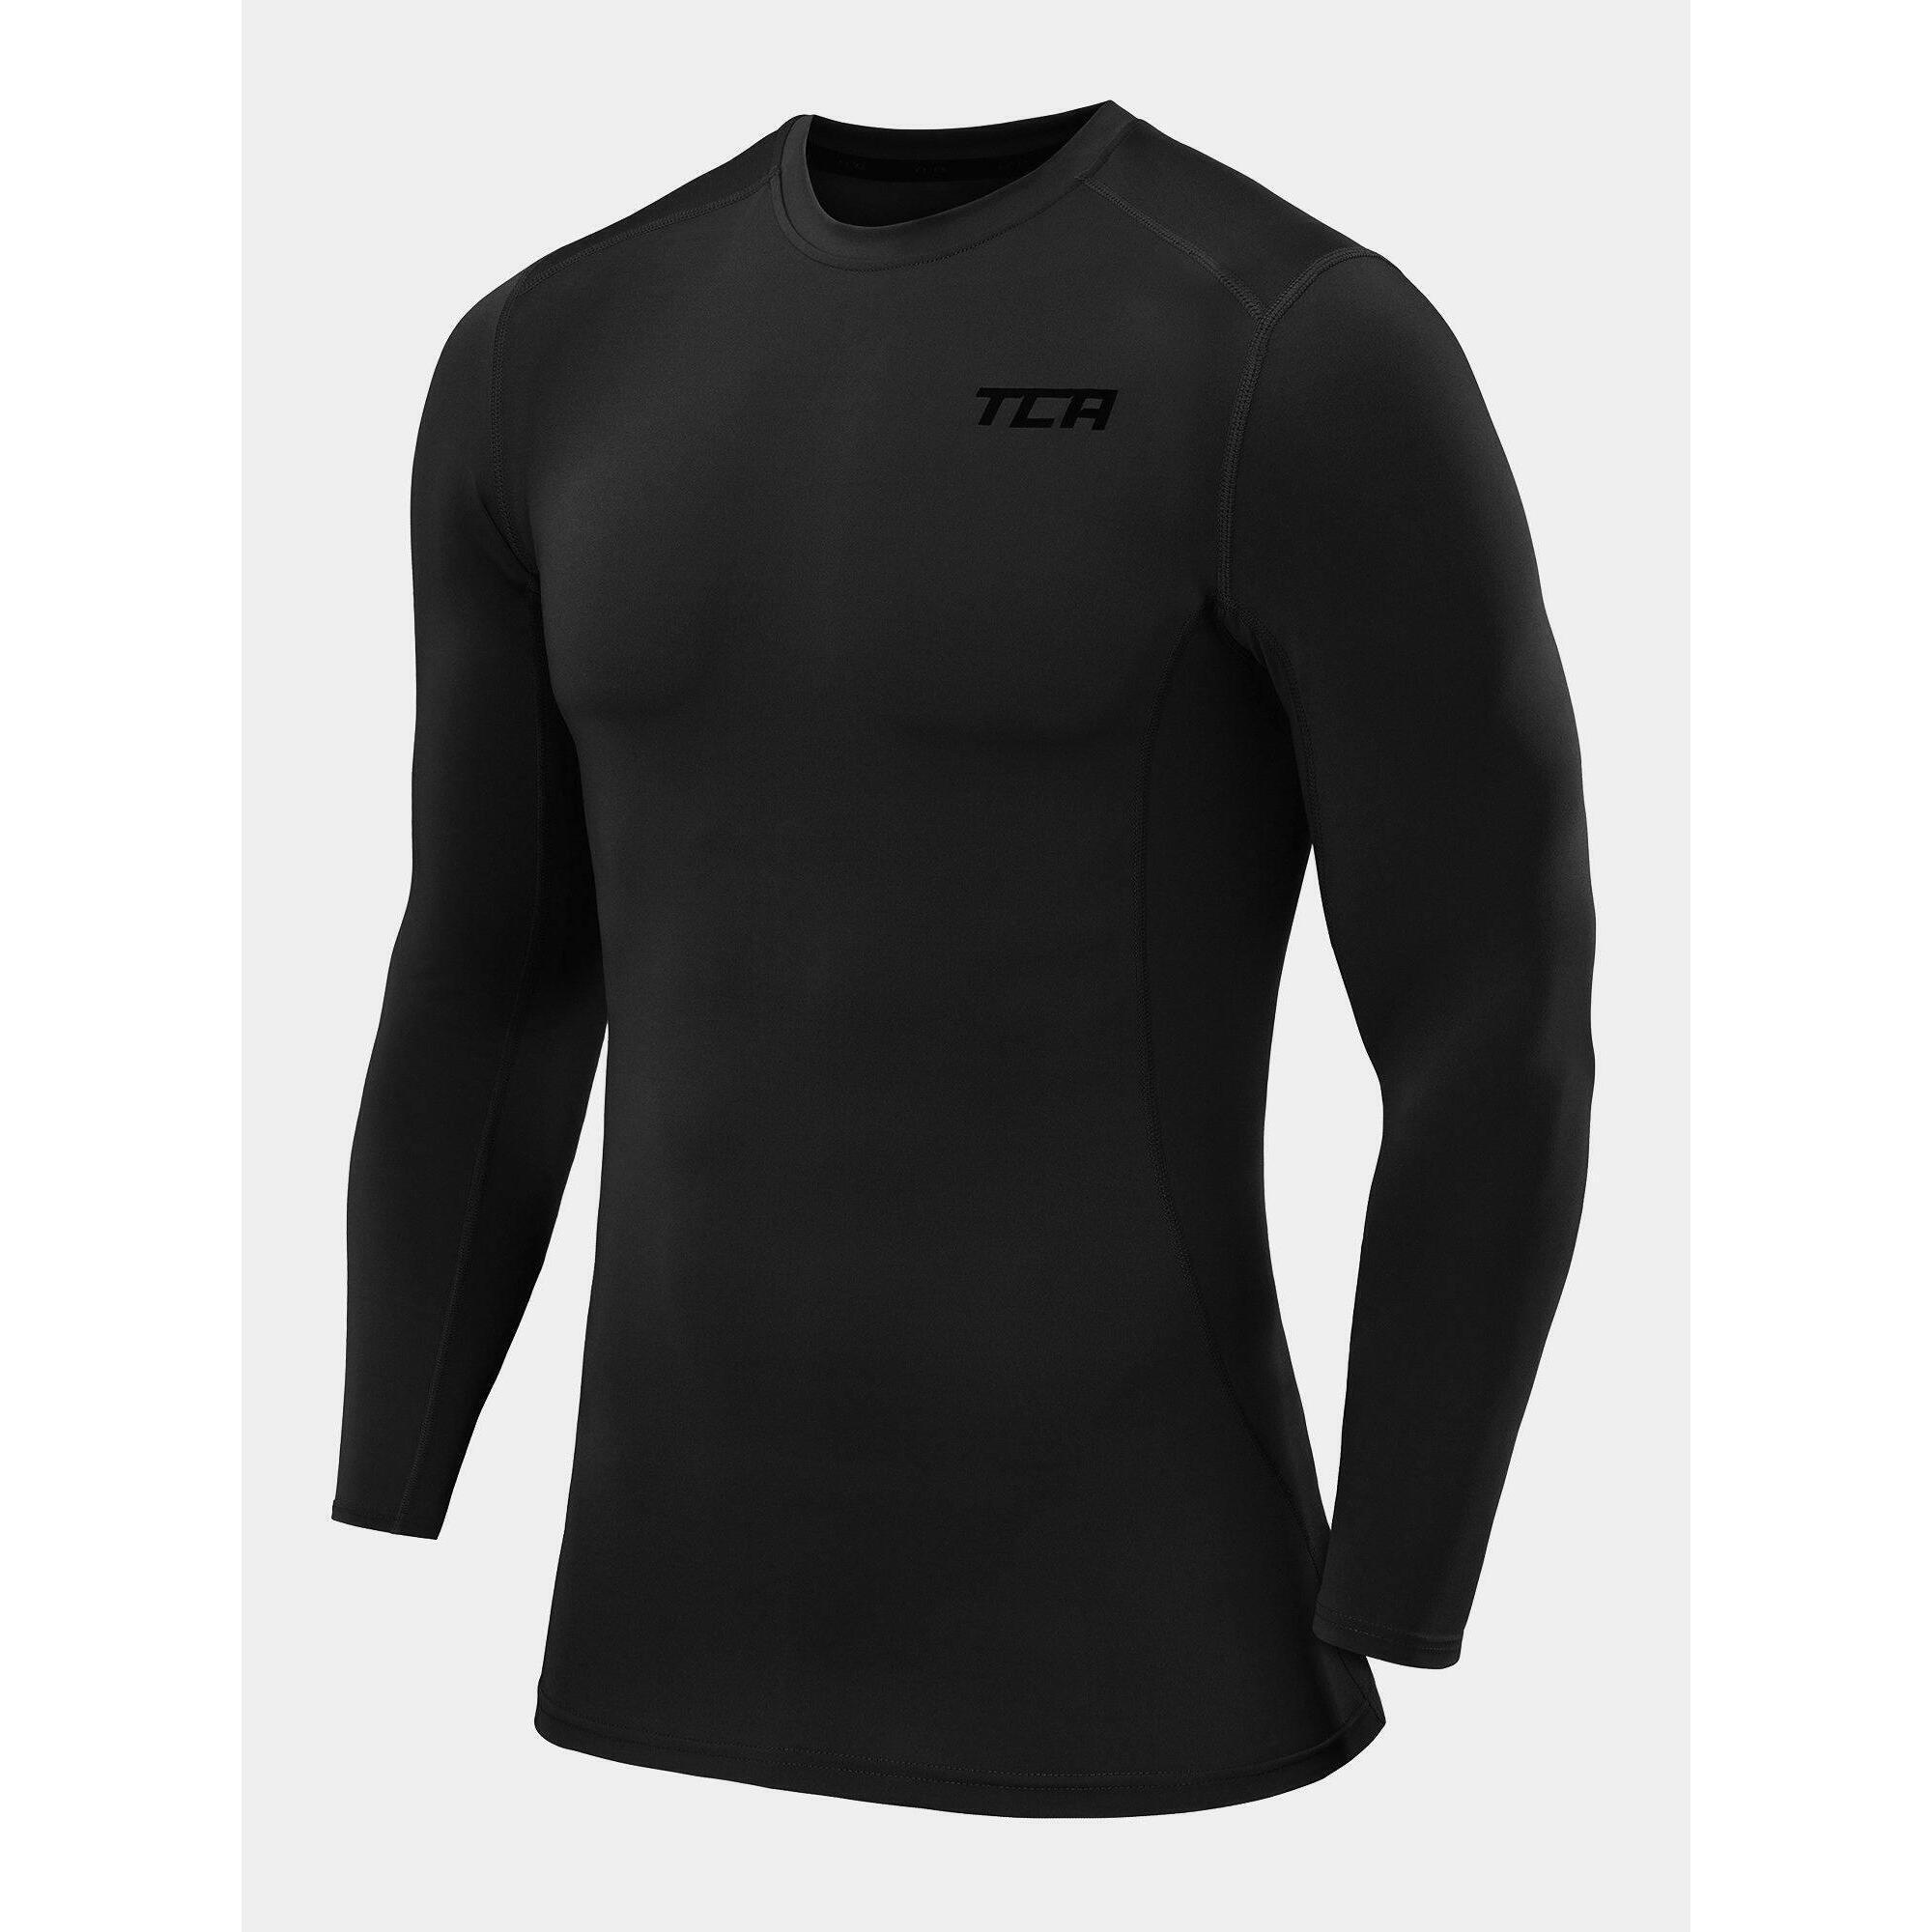 Men's Long Sleeve Compression Shirt Base-Layer Stretch Athletic